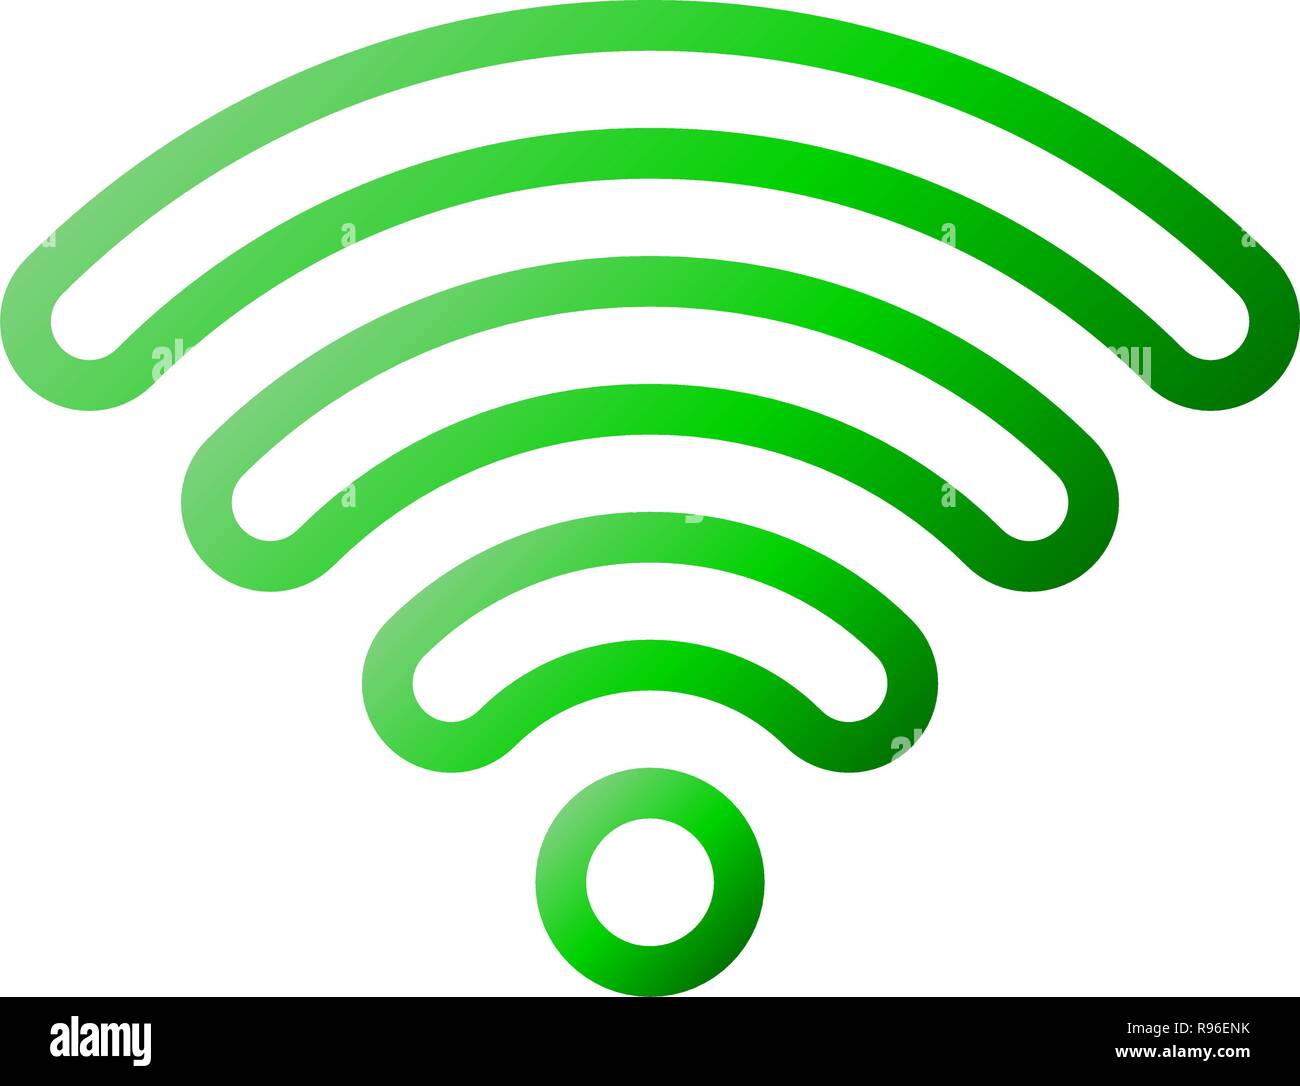 Wifi symbol icon - green outlined rounded gradient, isolated - vector illustration Stock Vector